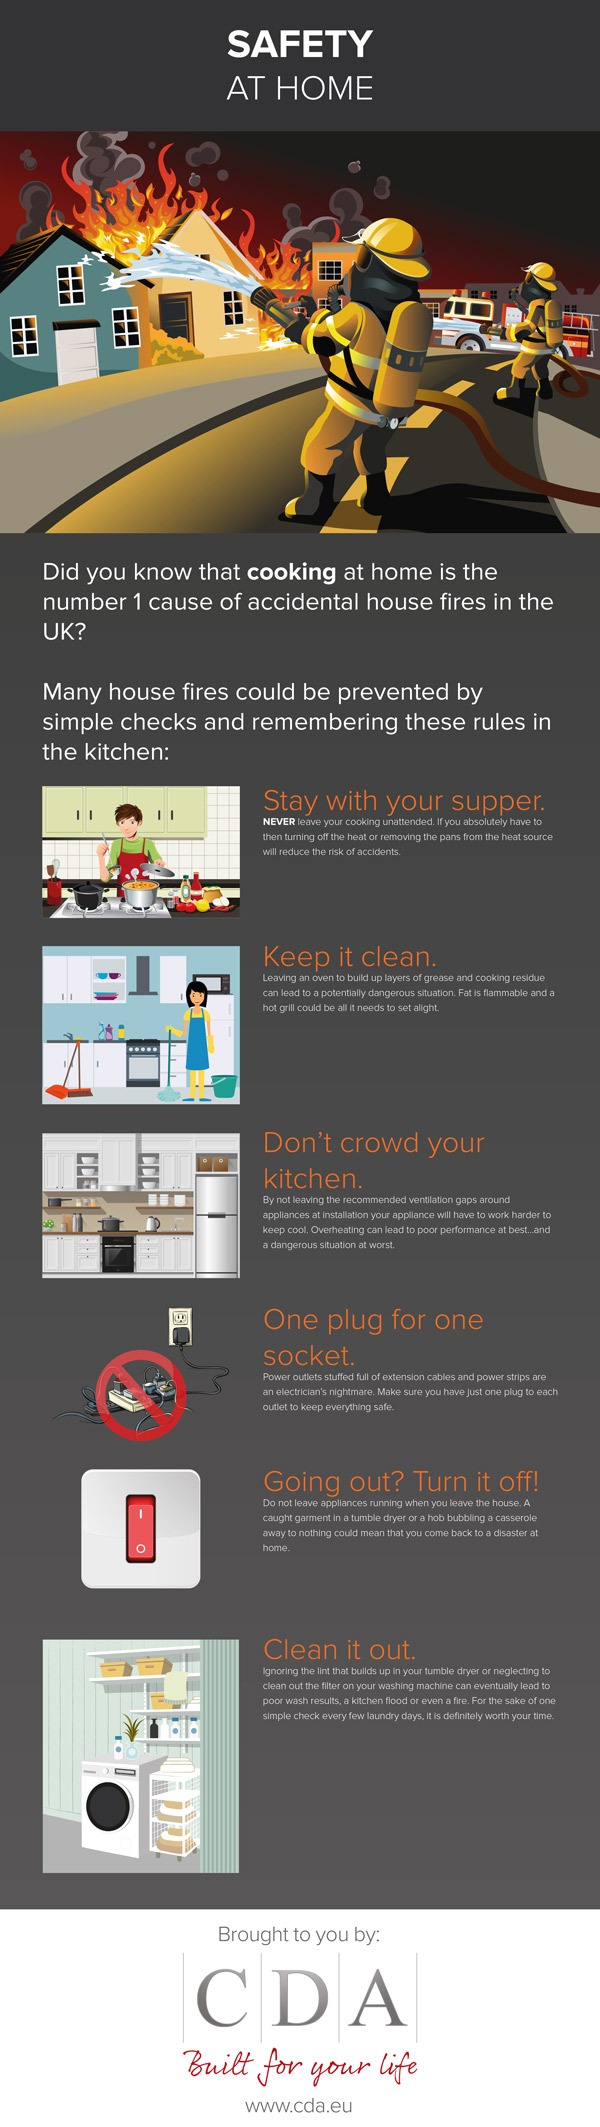 safety-at-home-info-graphics-290916-v1